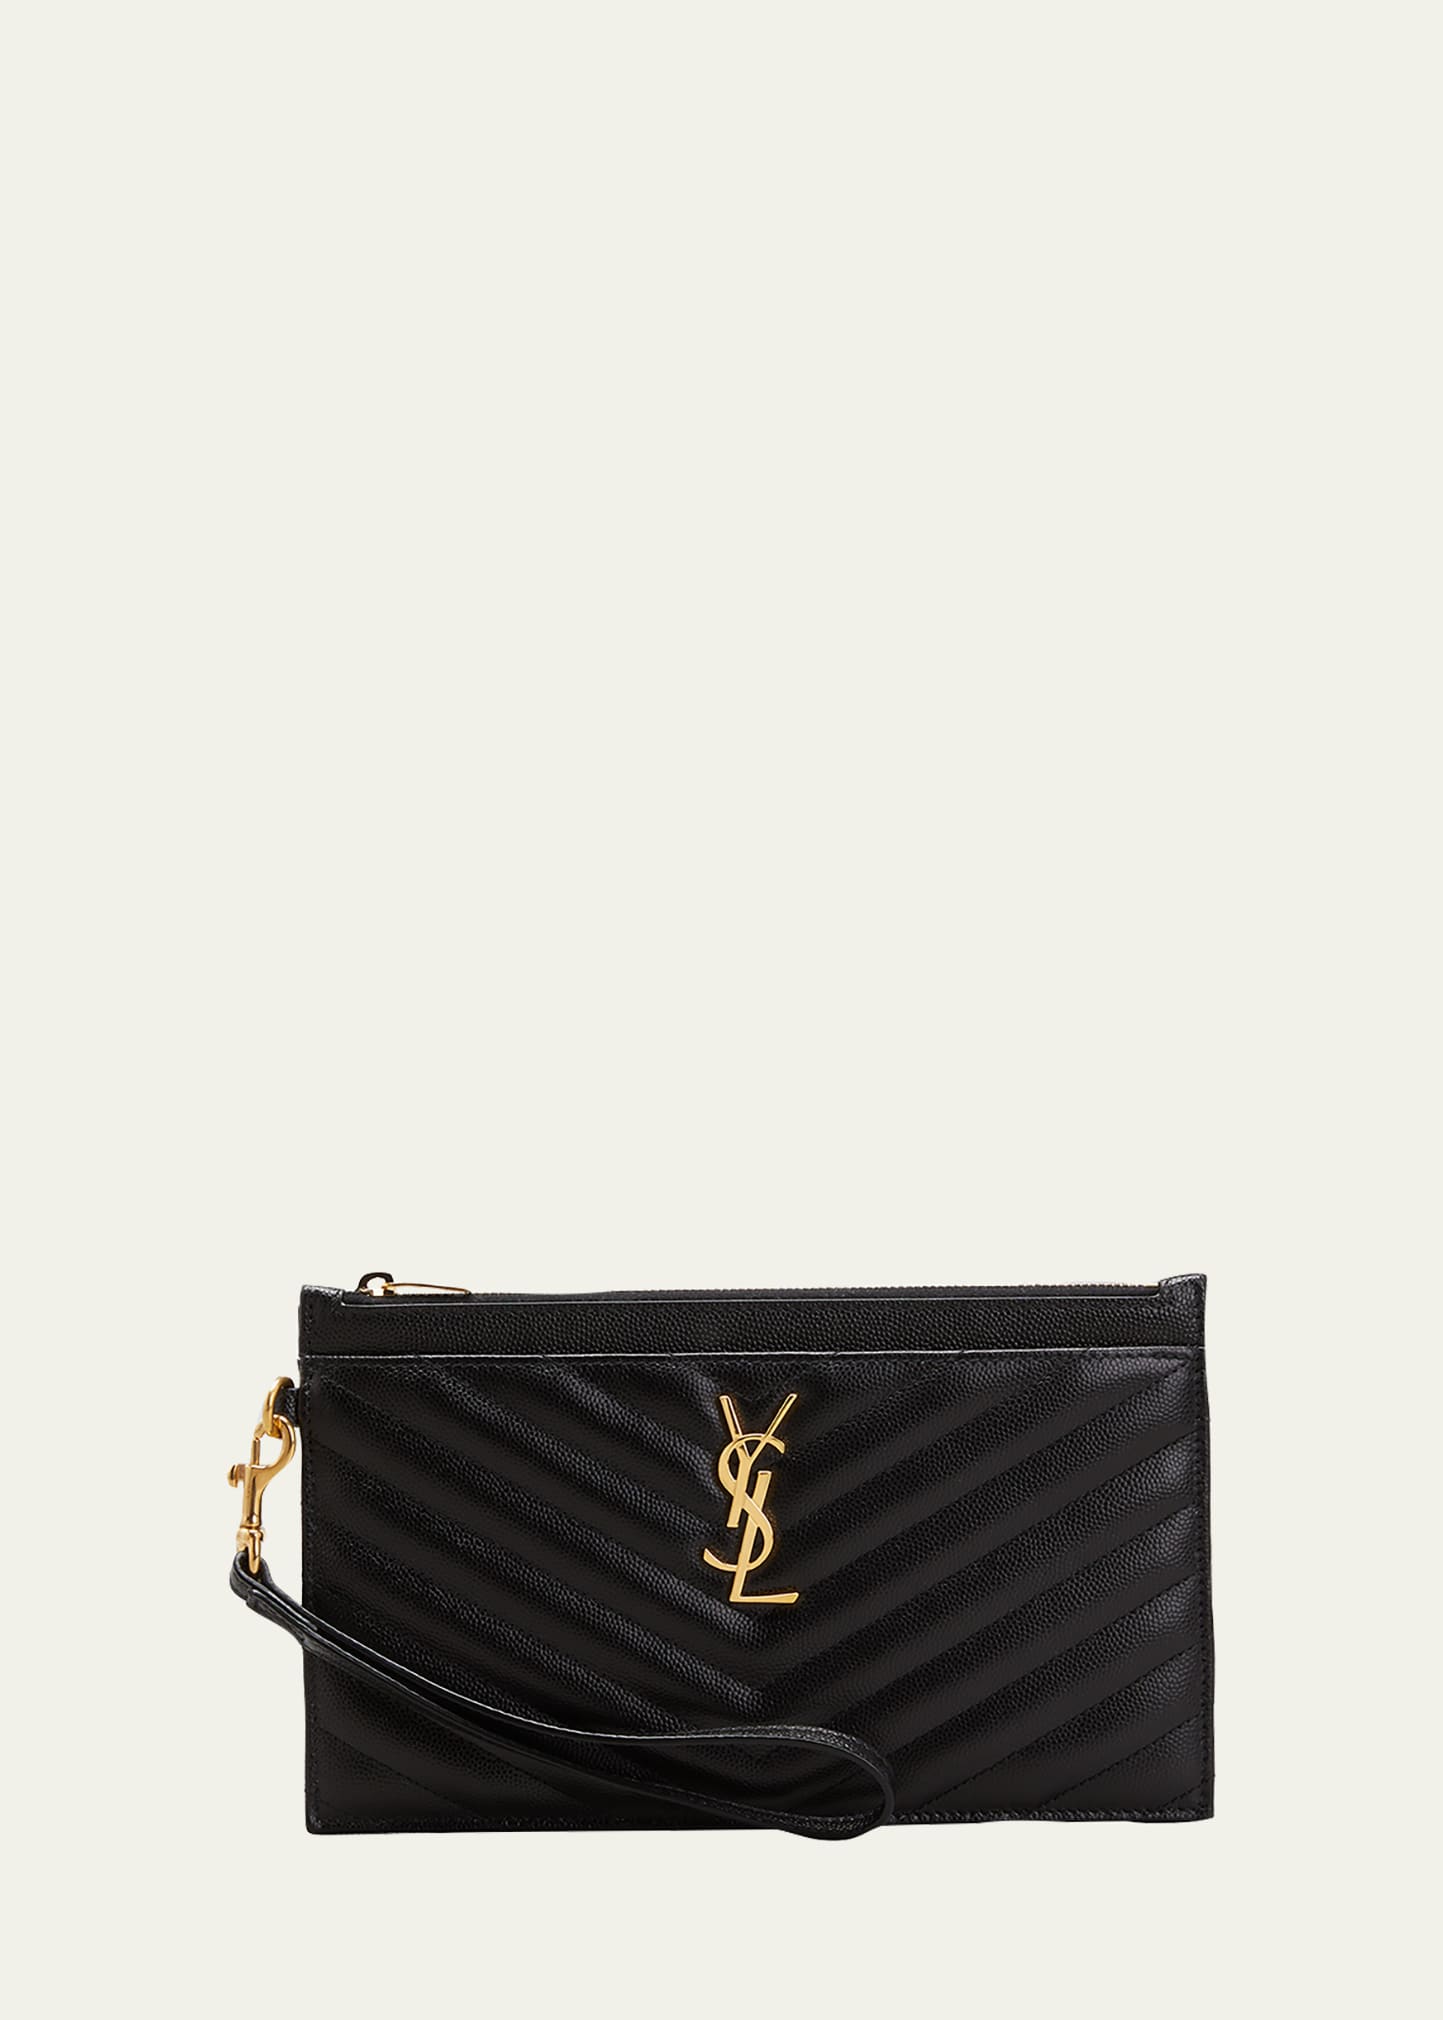 YSL Monogram Large Bill Pouch in Grained Leather